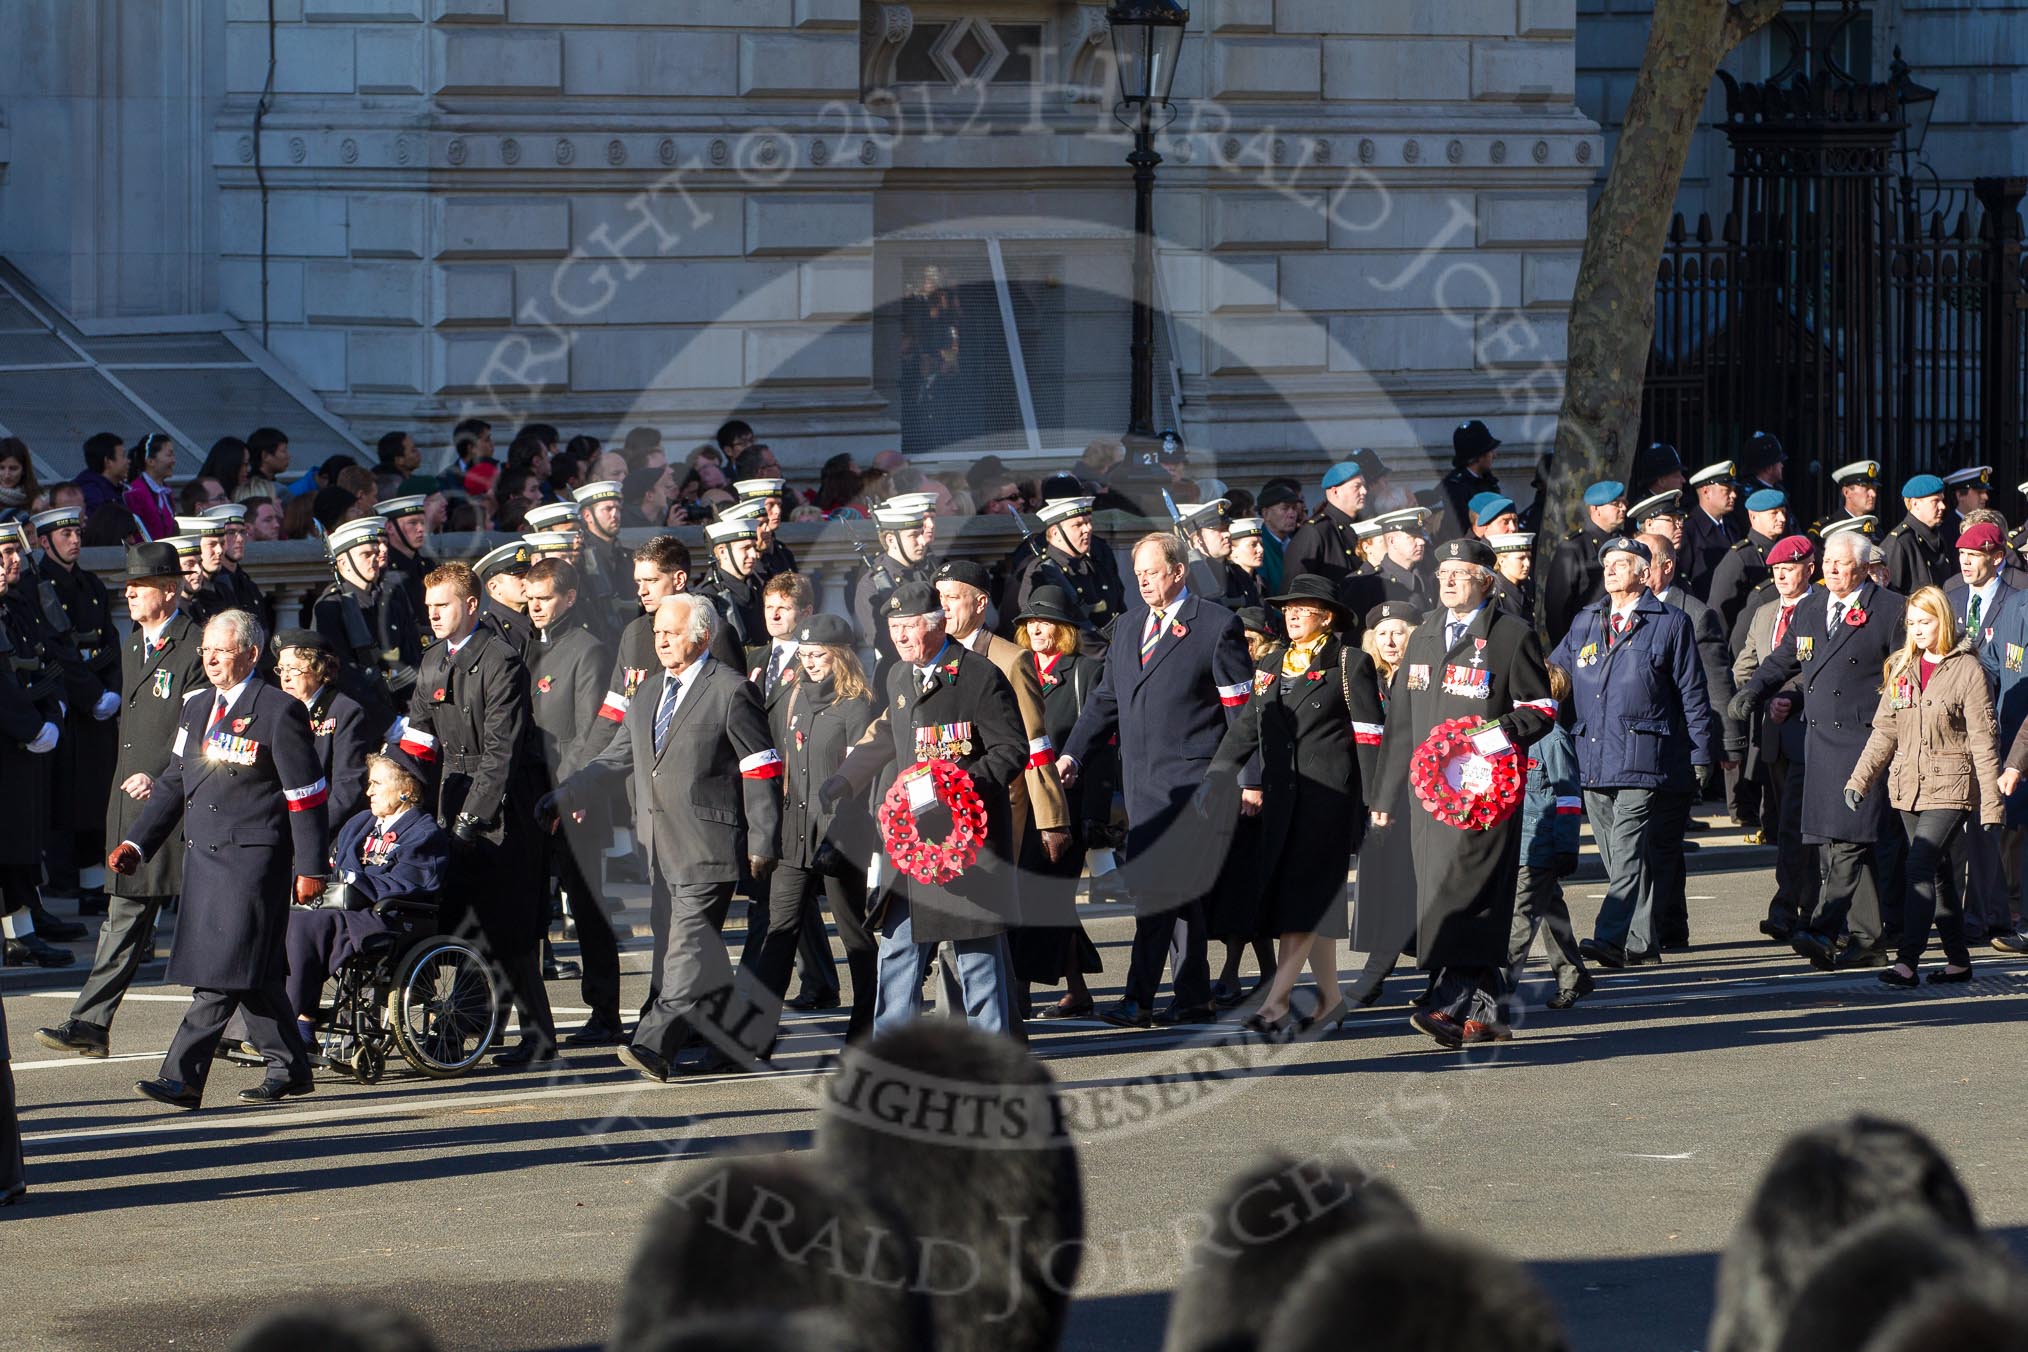 Remembrance Sunday 2012 Cenotaph March Past: Group D11 - Polish Ex-Combatants Association in Great Britain and D12 - Canadian Veterans Association..
Whitehall, Cenotaph,
London SW1,

United Kingdom,
on 11 November 2012 at 12:06, image #1311